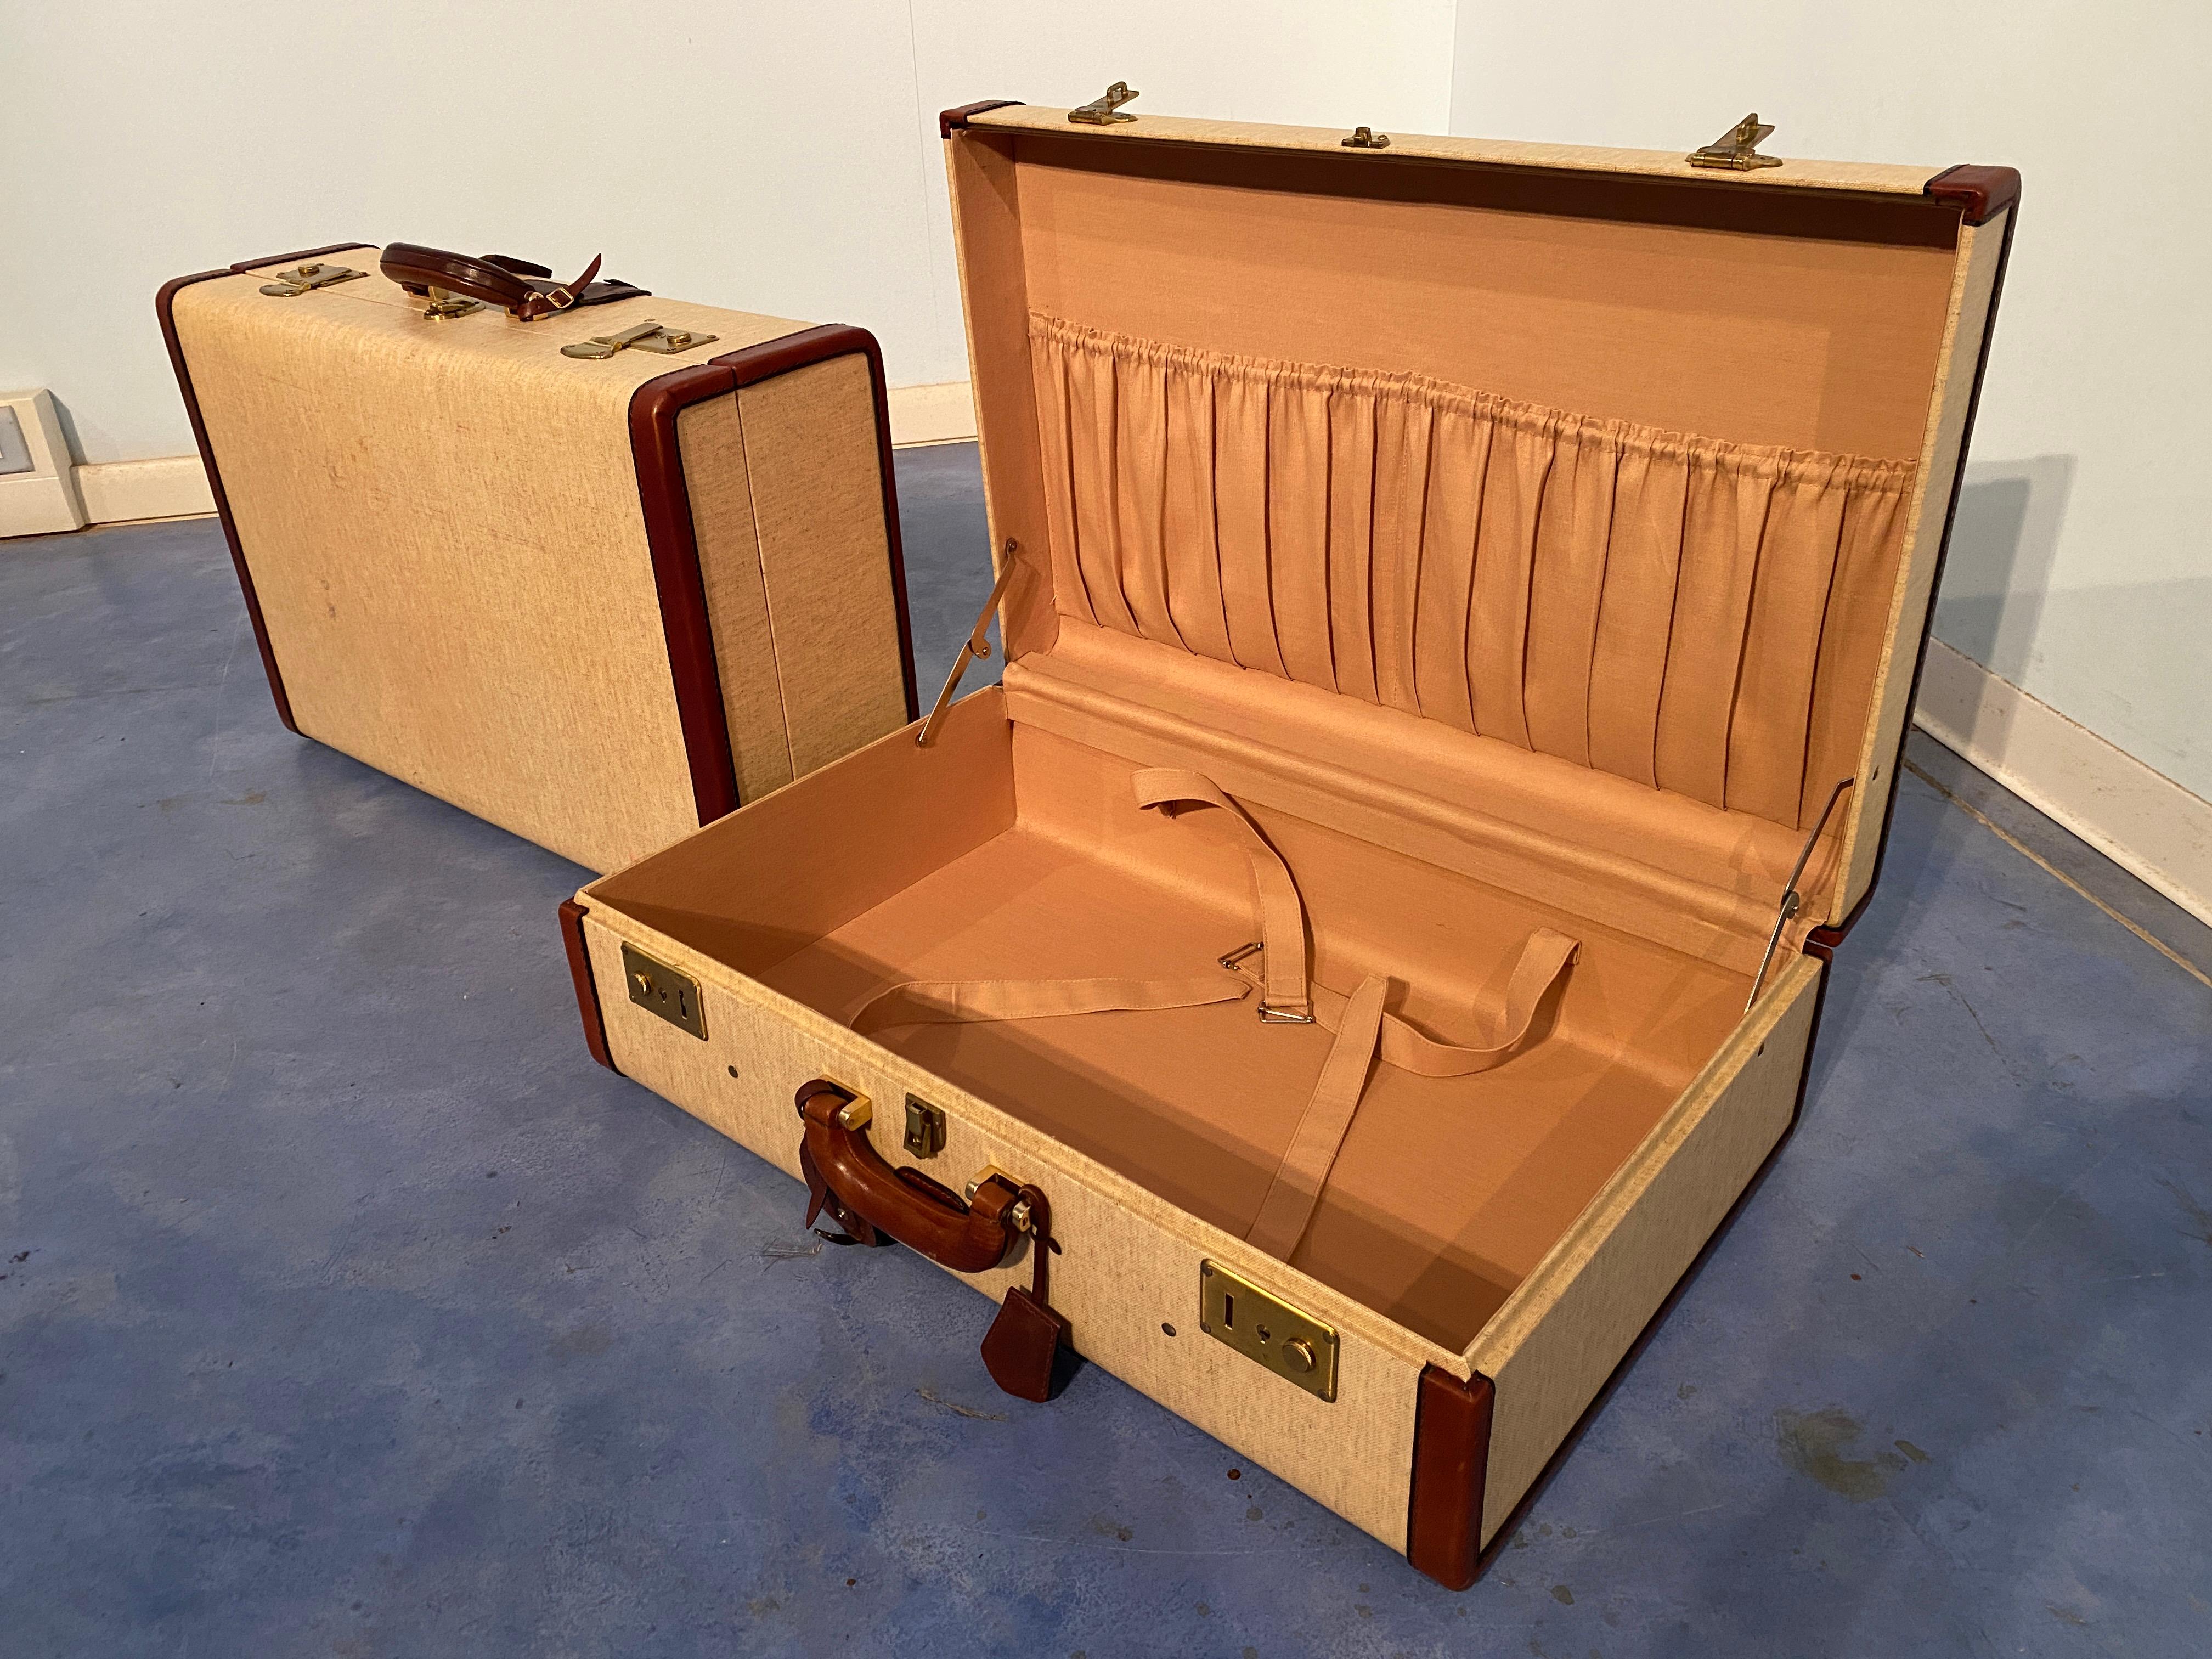 Italian Mid-Century Moder Luggages or Suitcases Mèlange Color, Set of Two, 1960 For Sale 3